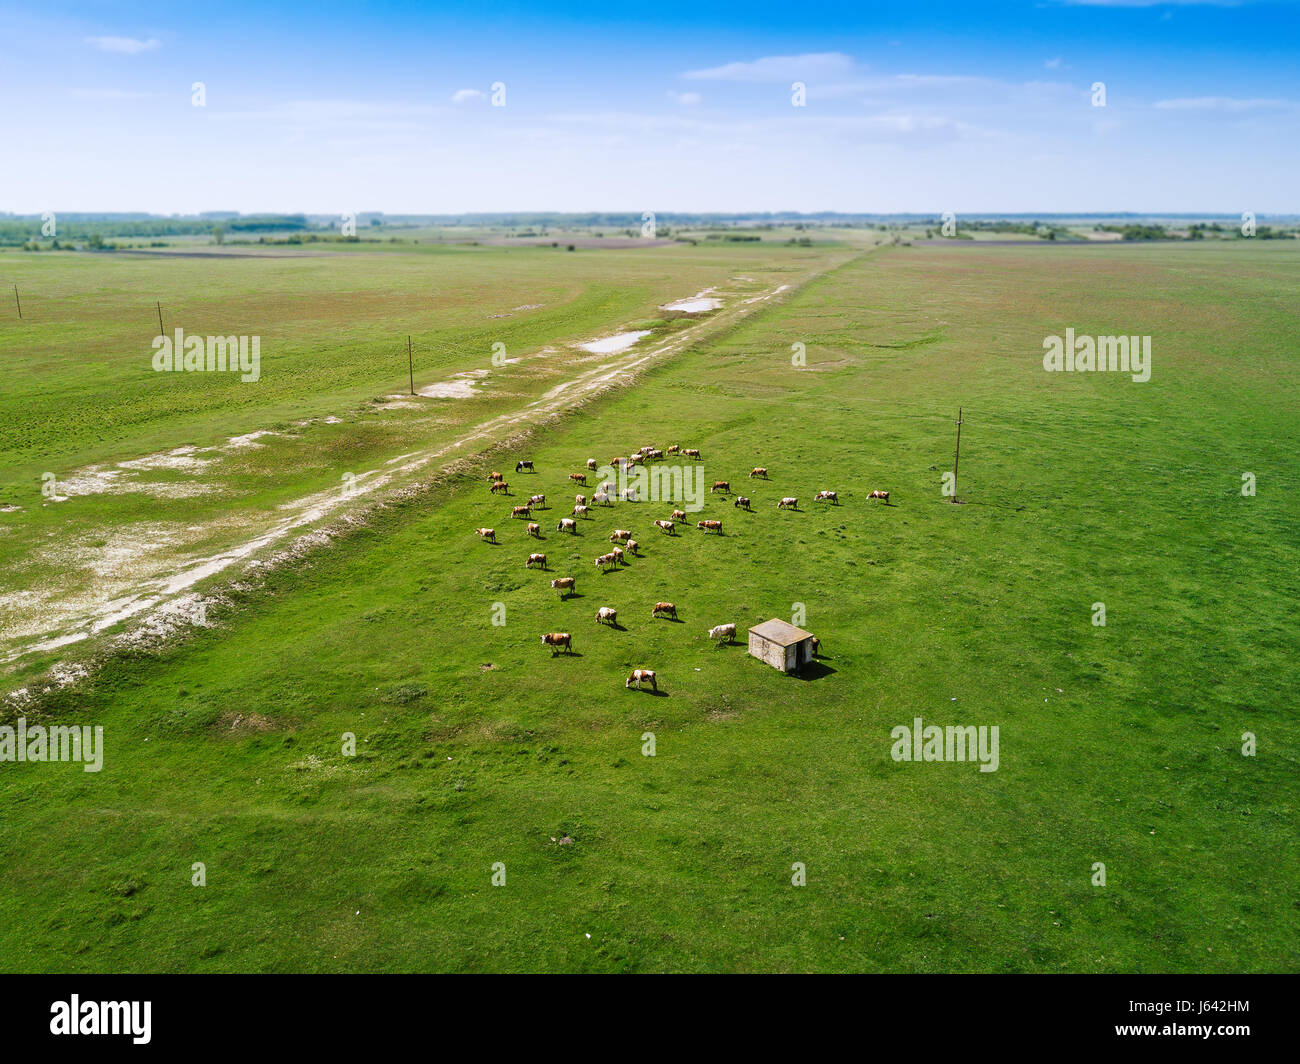 Aerial view of cows herd grazing on pasture field, drone point of view Stock Photo